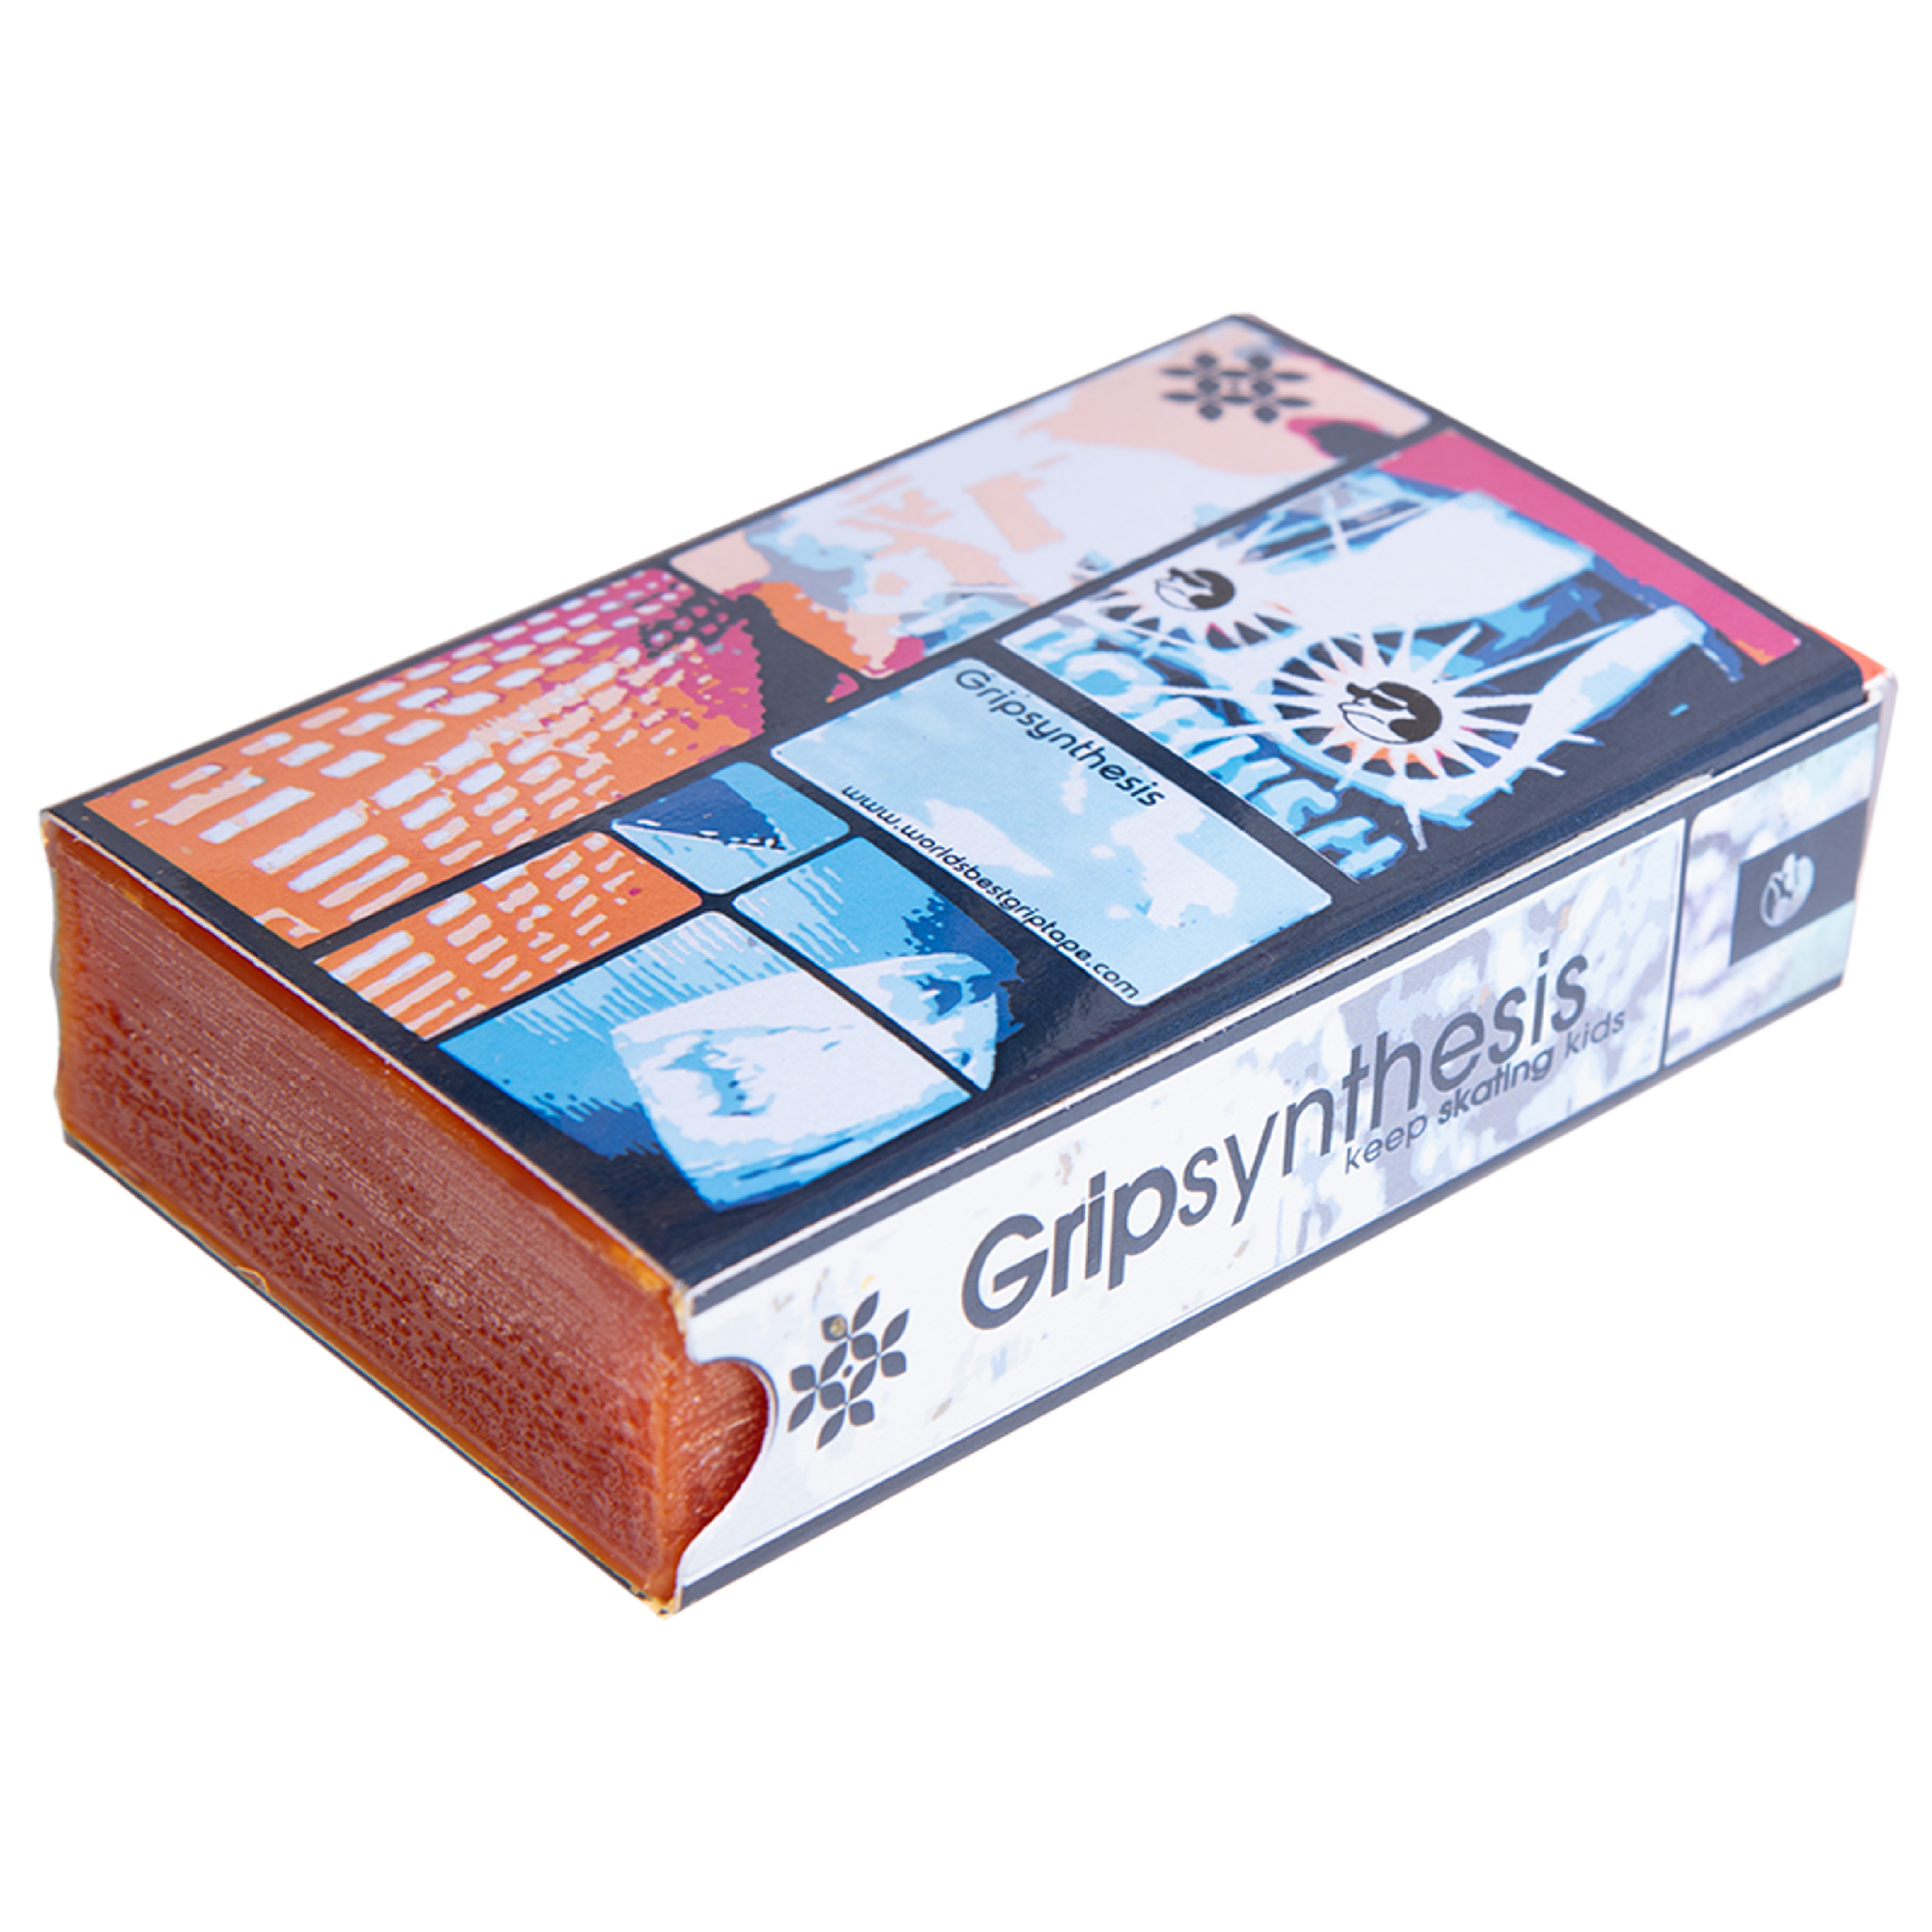 Classic Grip Gripsynthesis VHS Wax